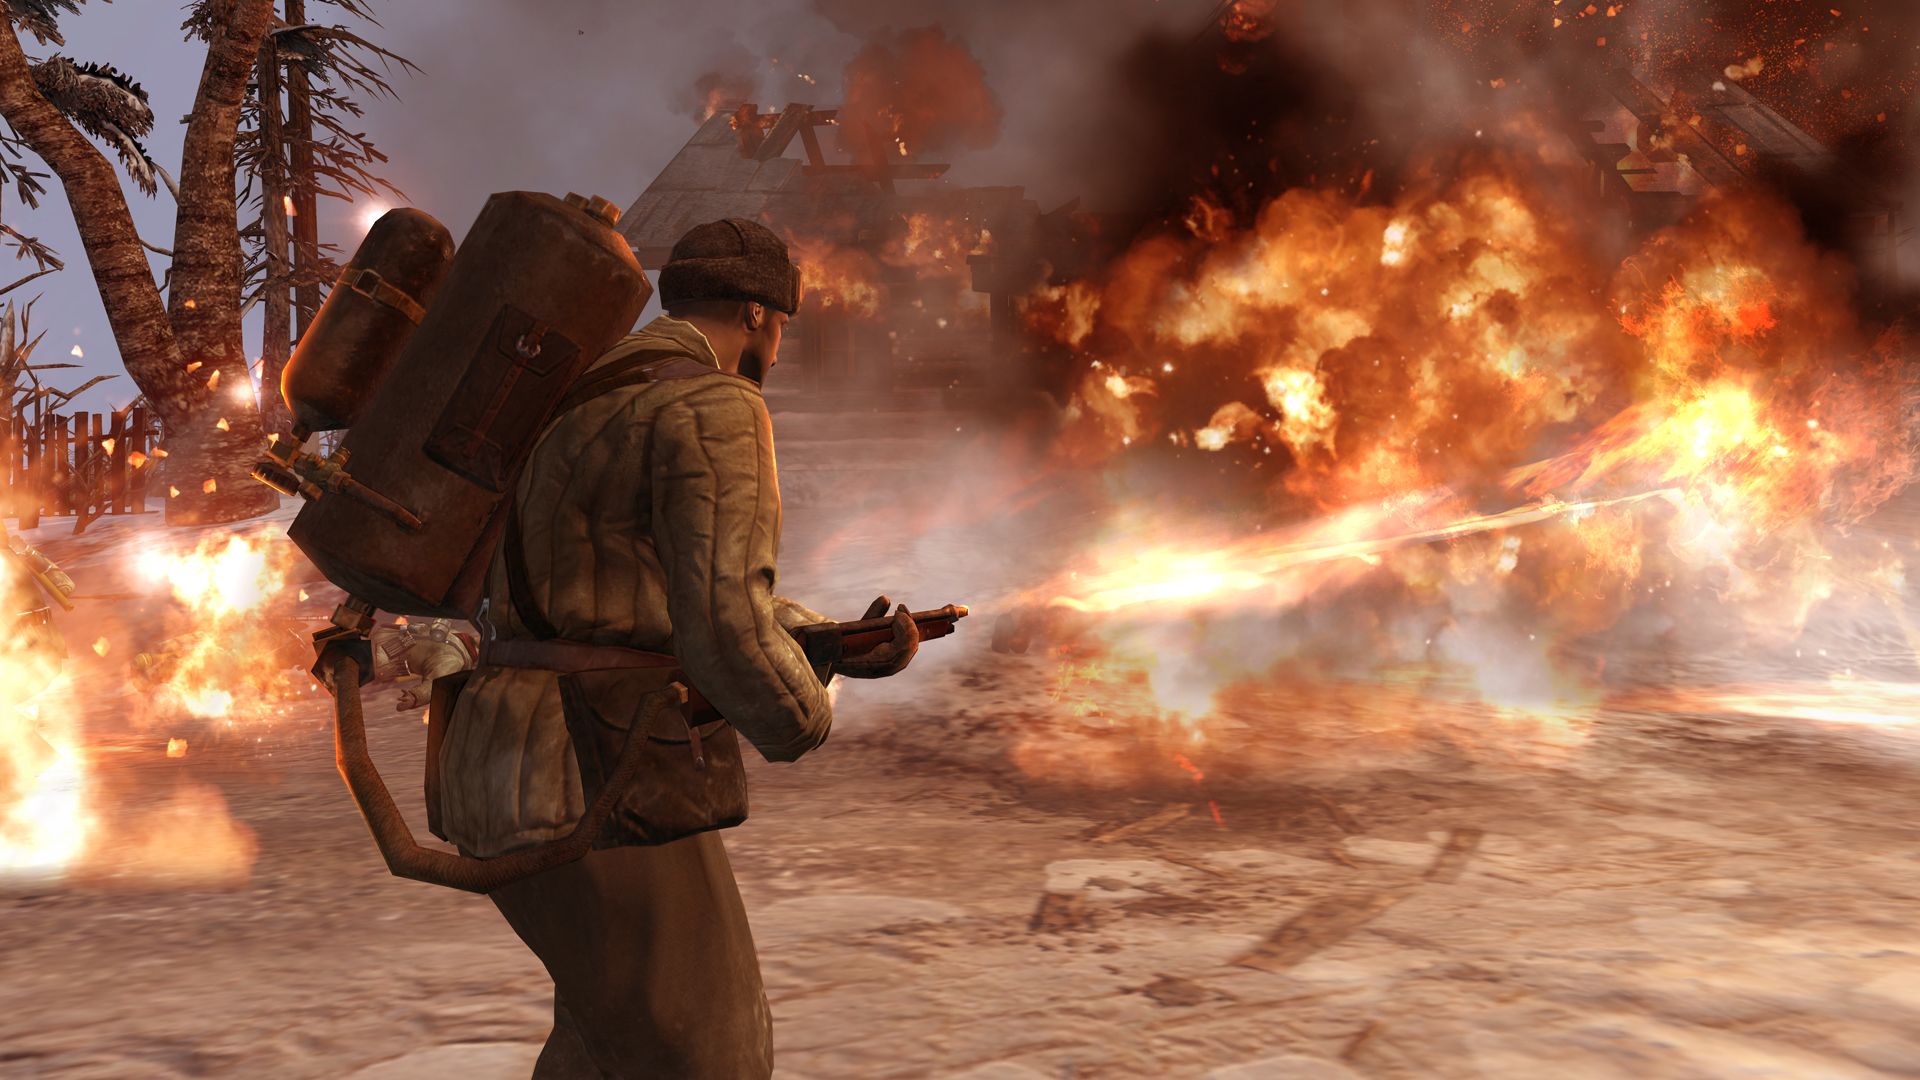 company of heroes 2 review 2020